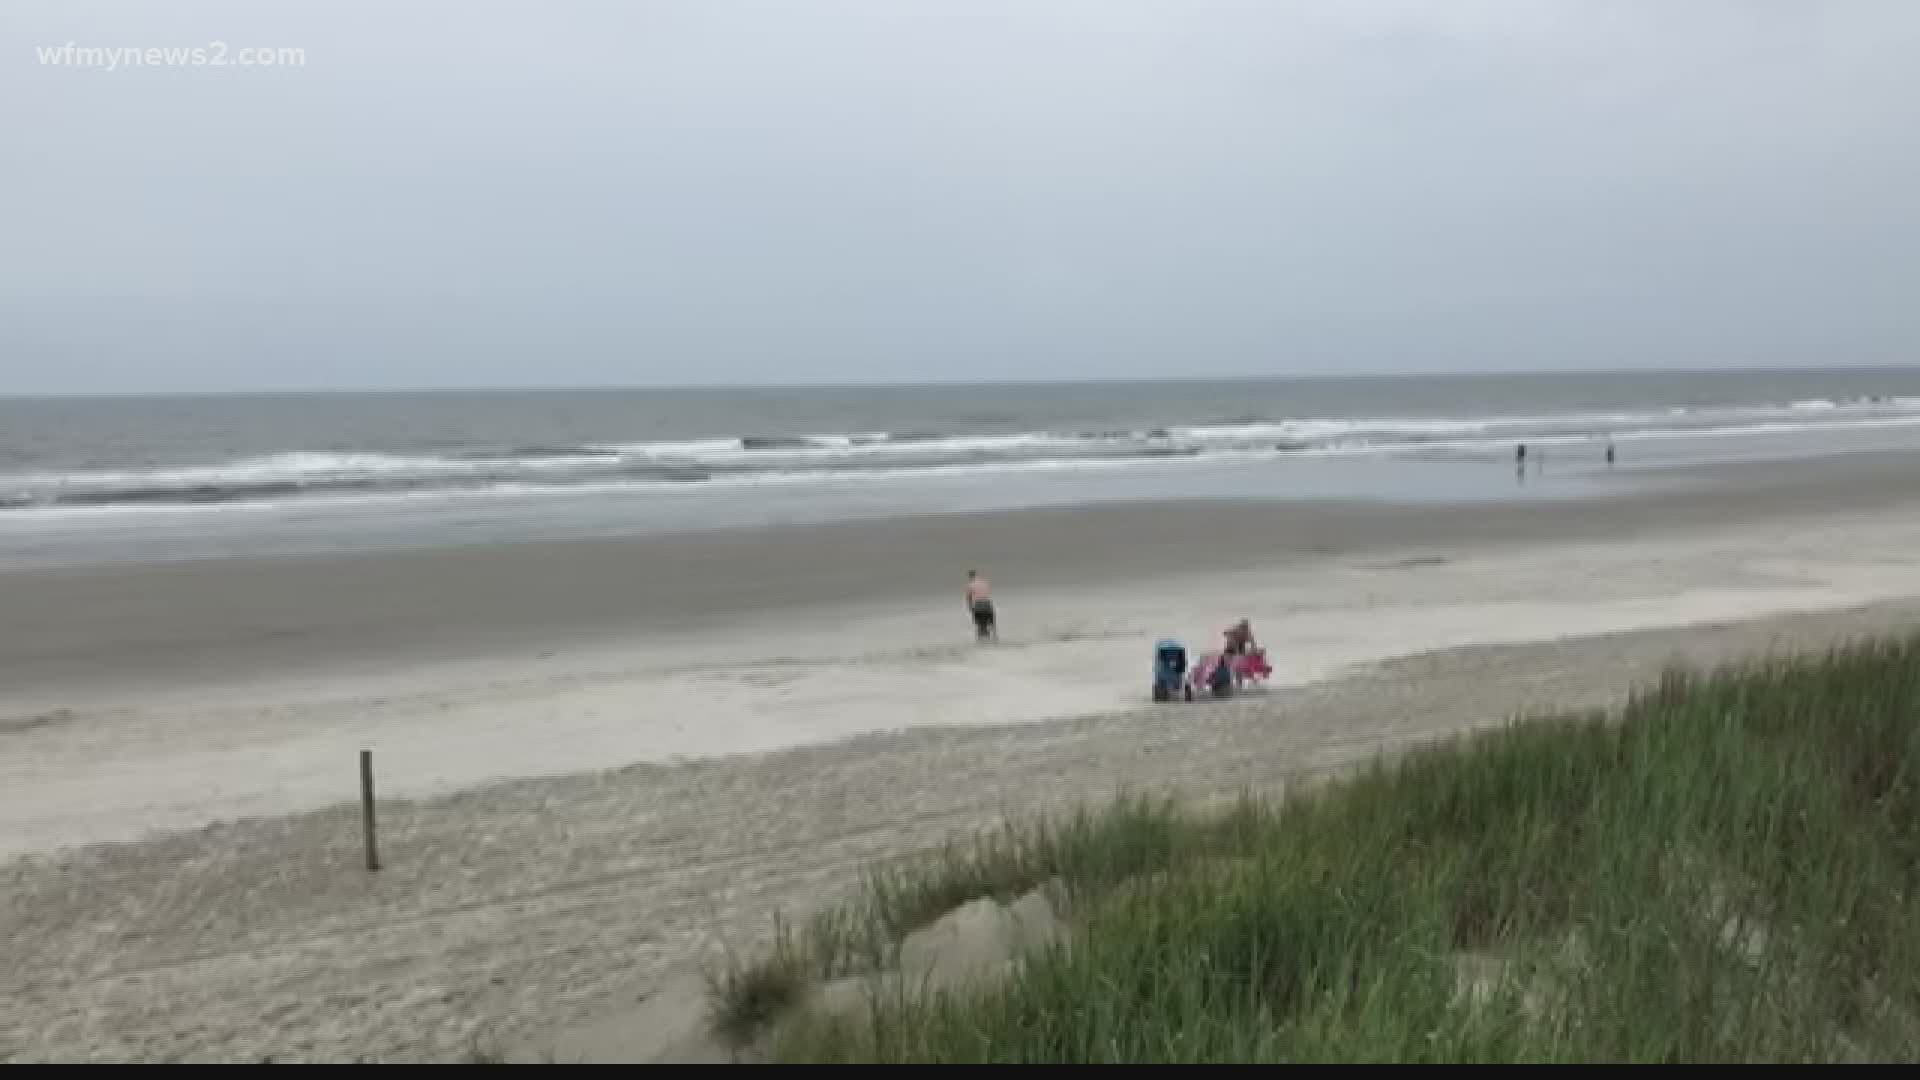 WFMY News 2 General Manager Larry Audas is on vacation in Sunset Beach. He gives an update on conditions ahead of the storm.